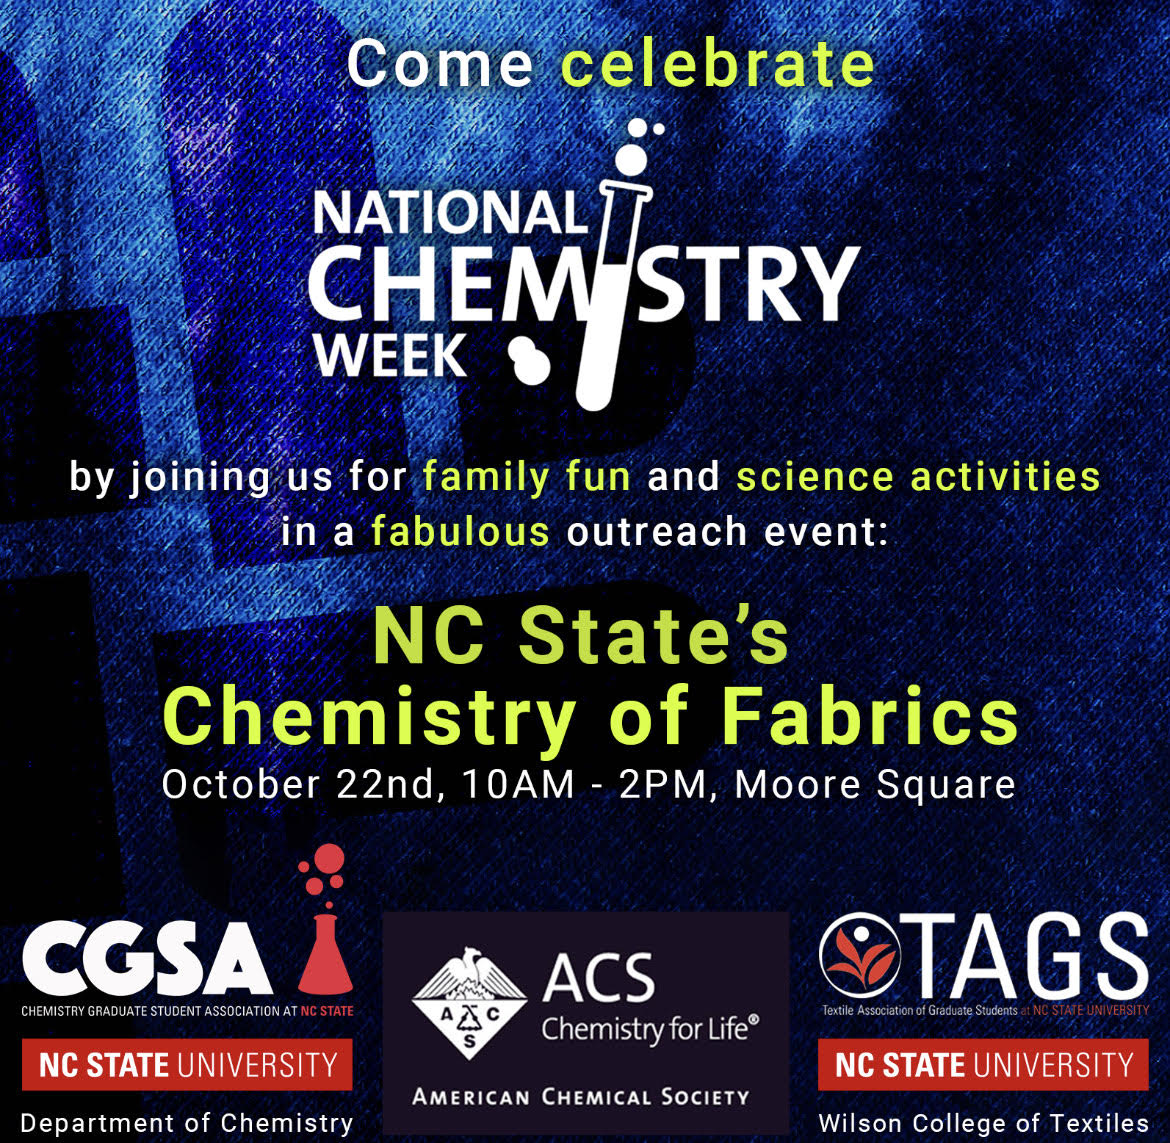 2022 Chemistry of Fabrics Banner to celebrate 2022 National Chemistry Week